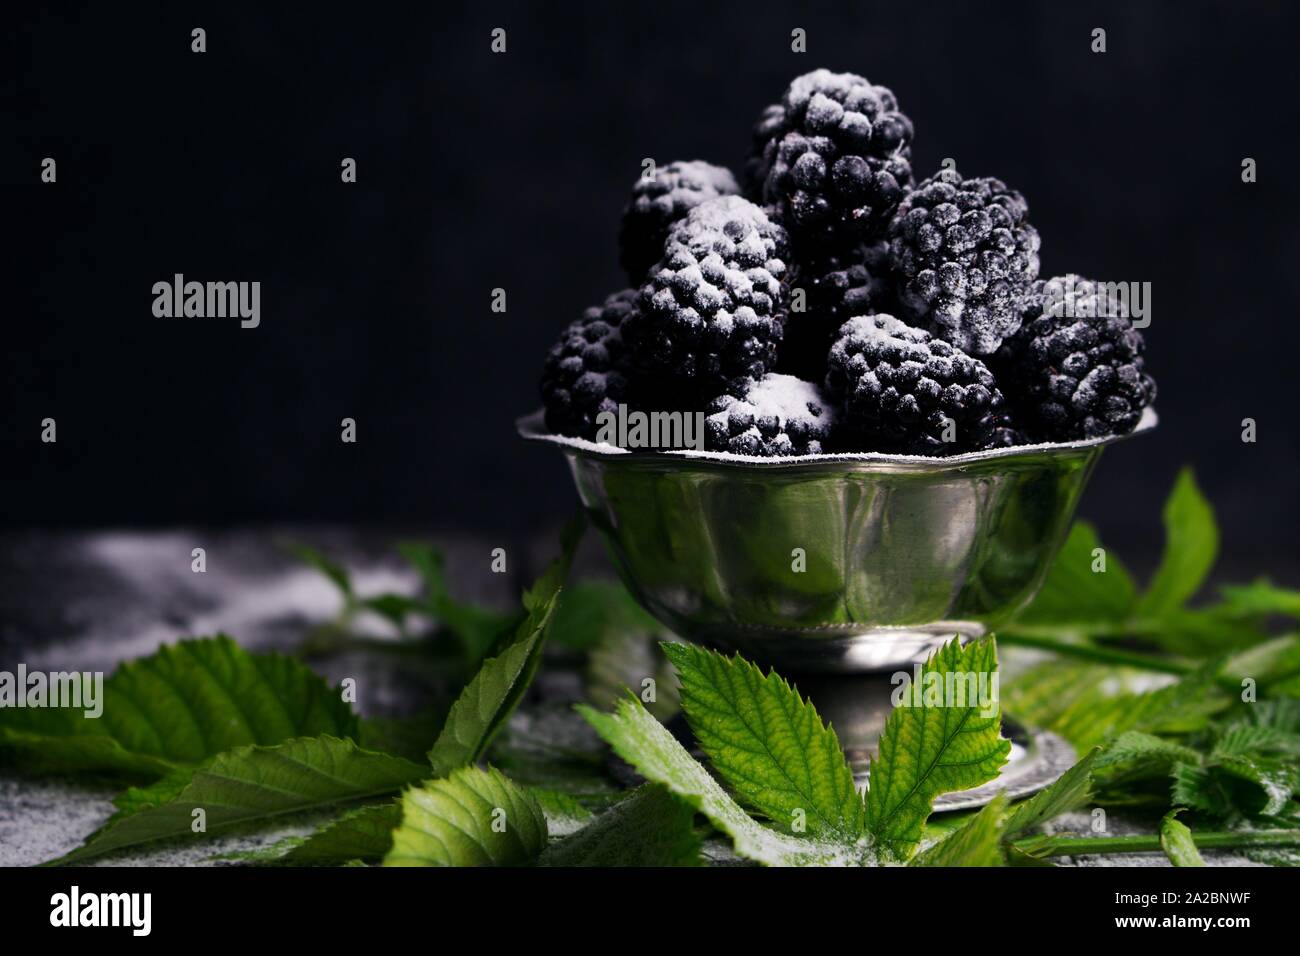 Blackberries Served With Sprinkled Powdered Sugar and Blackberry Leaves On Rustic Wooden Table. Stock Photo